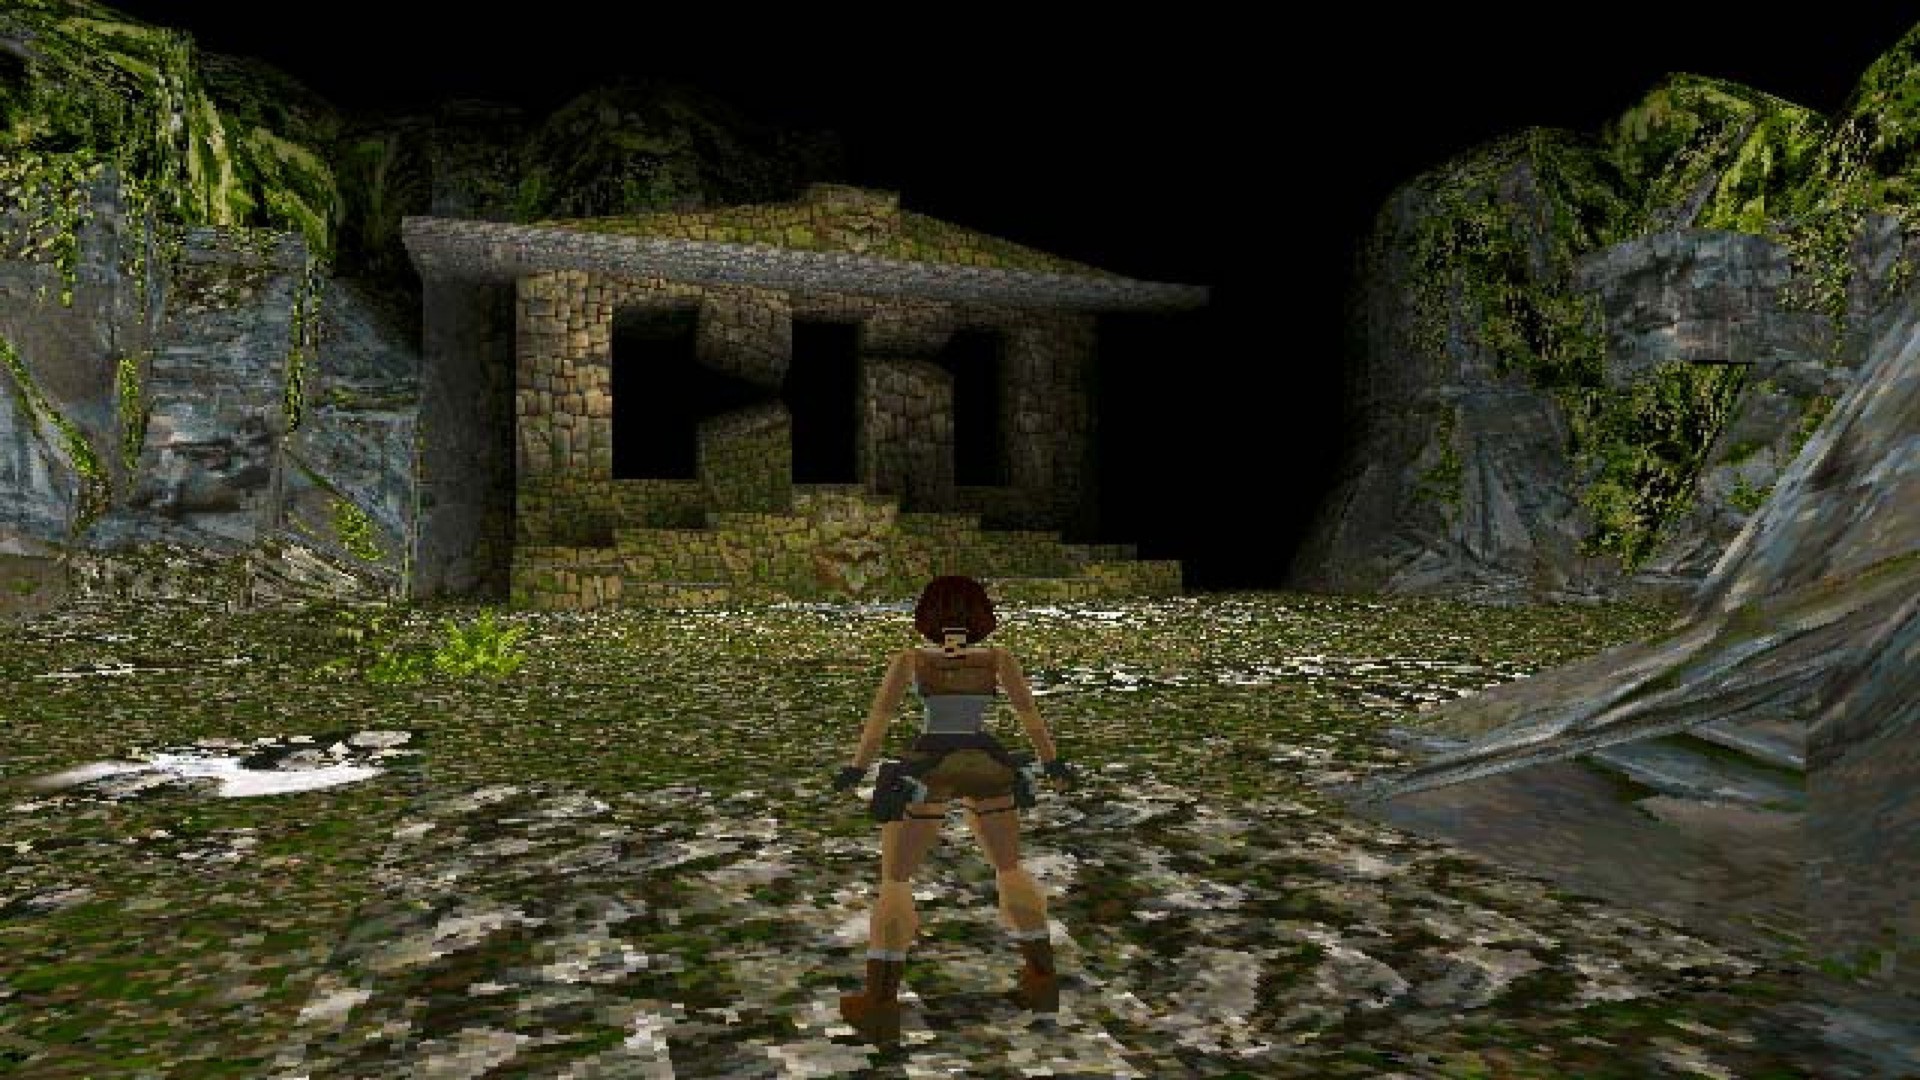 Tomb Raider Playstation 1 PS1 Game For Sale